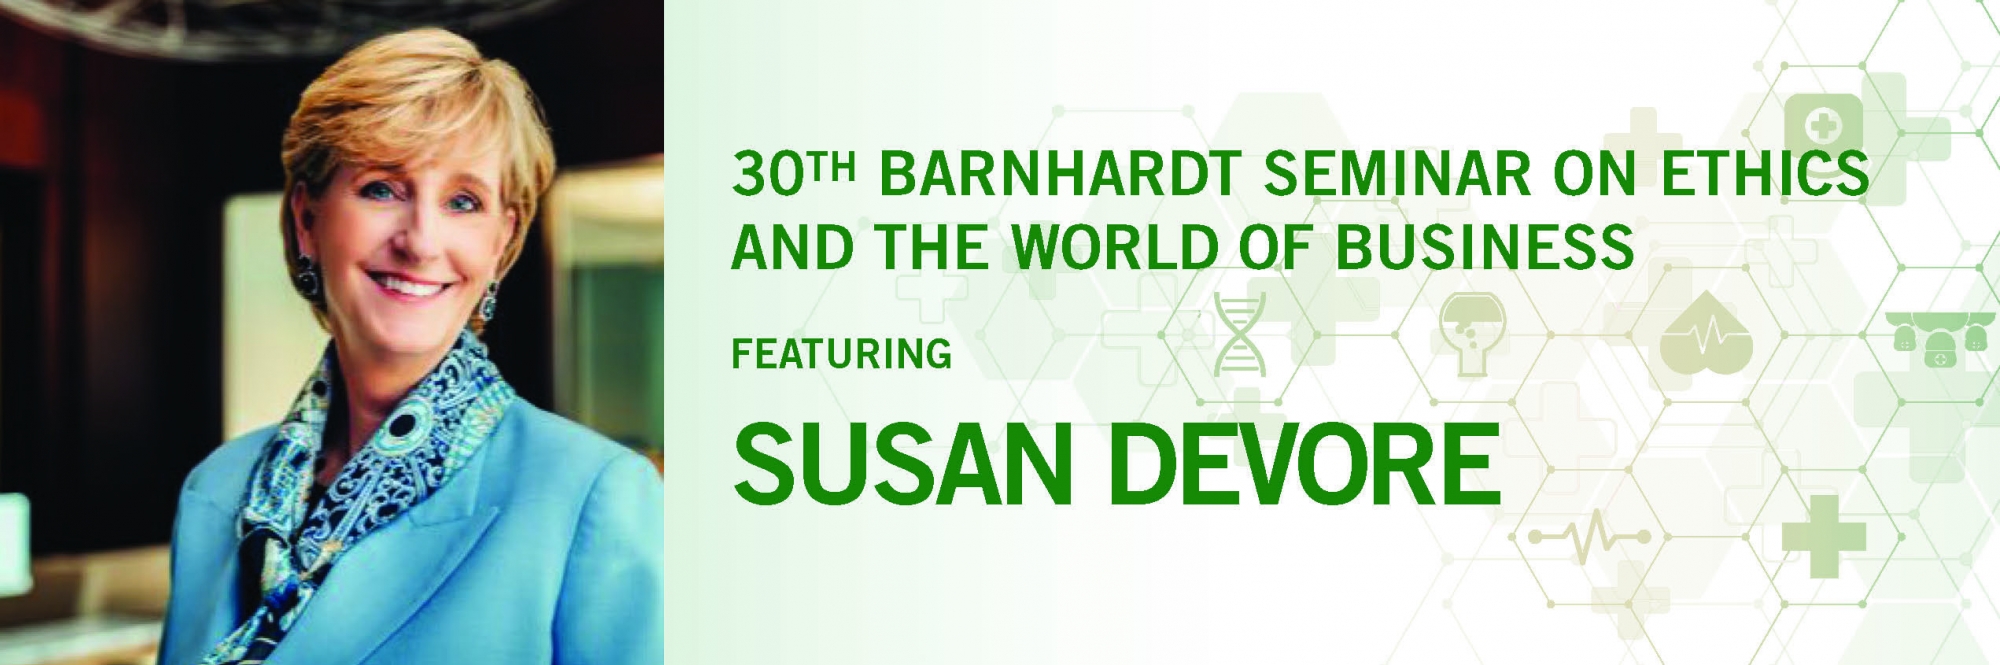 Susan DeVore ’81, CEO of Premier and a UNC Charlotte trustee, will deliver the 30th annual Barnhardt Seminar on Ethics and the World of Business